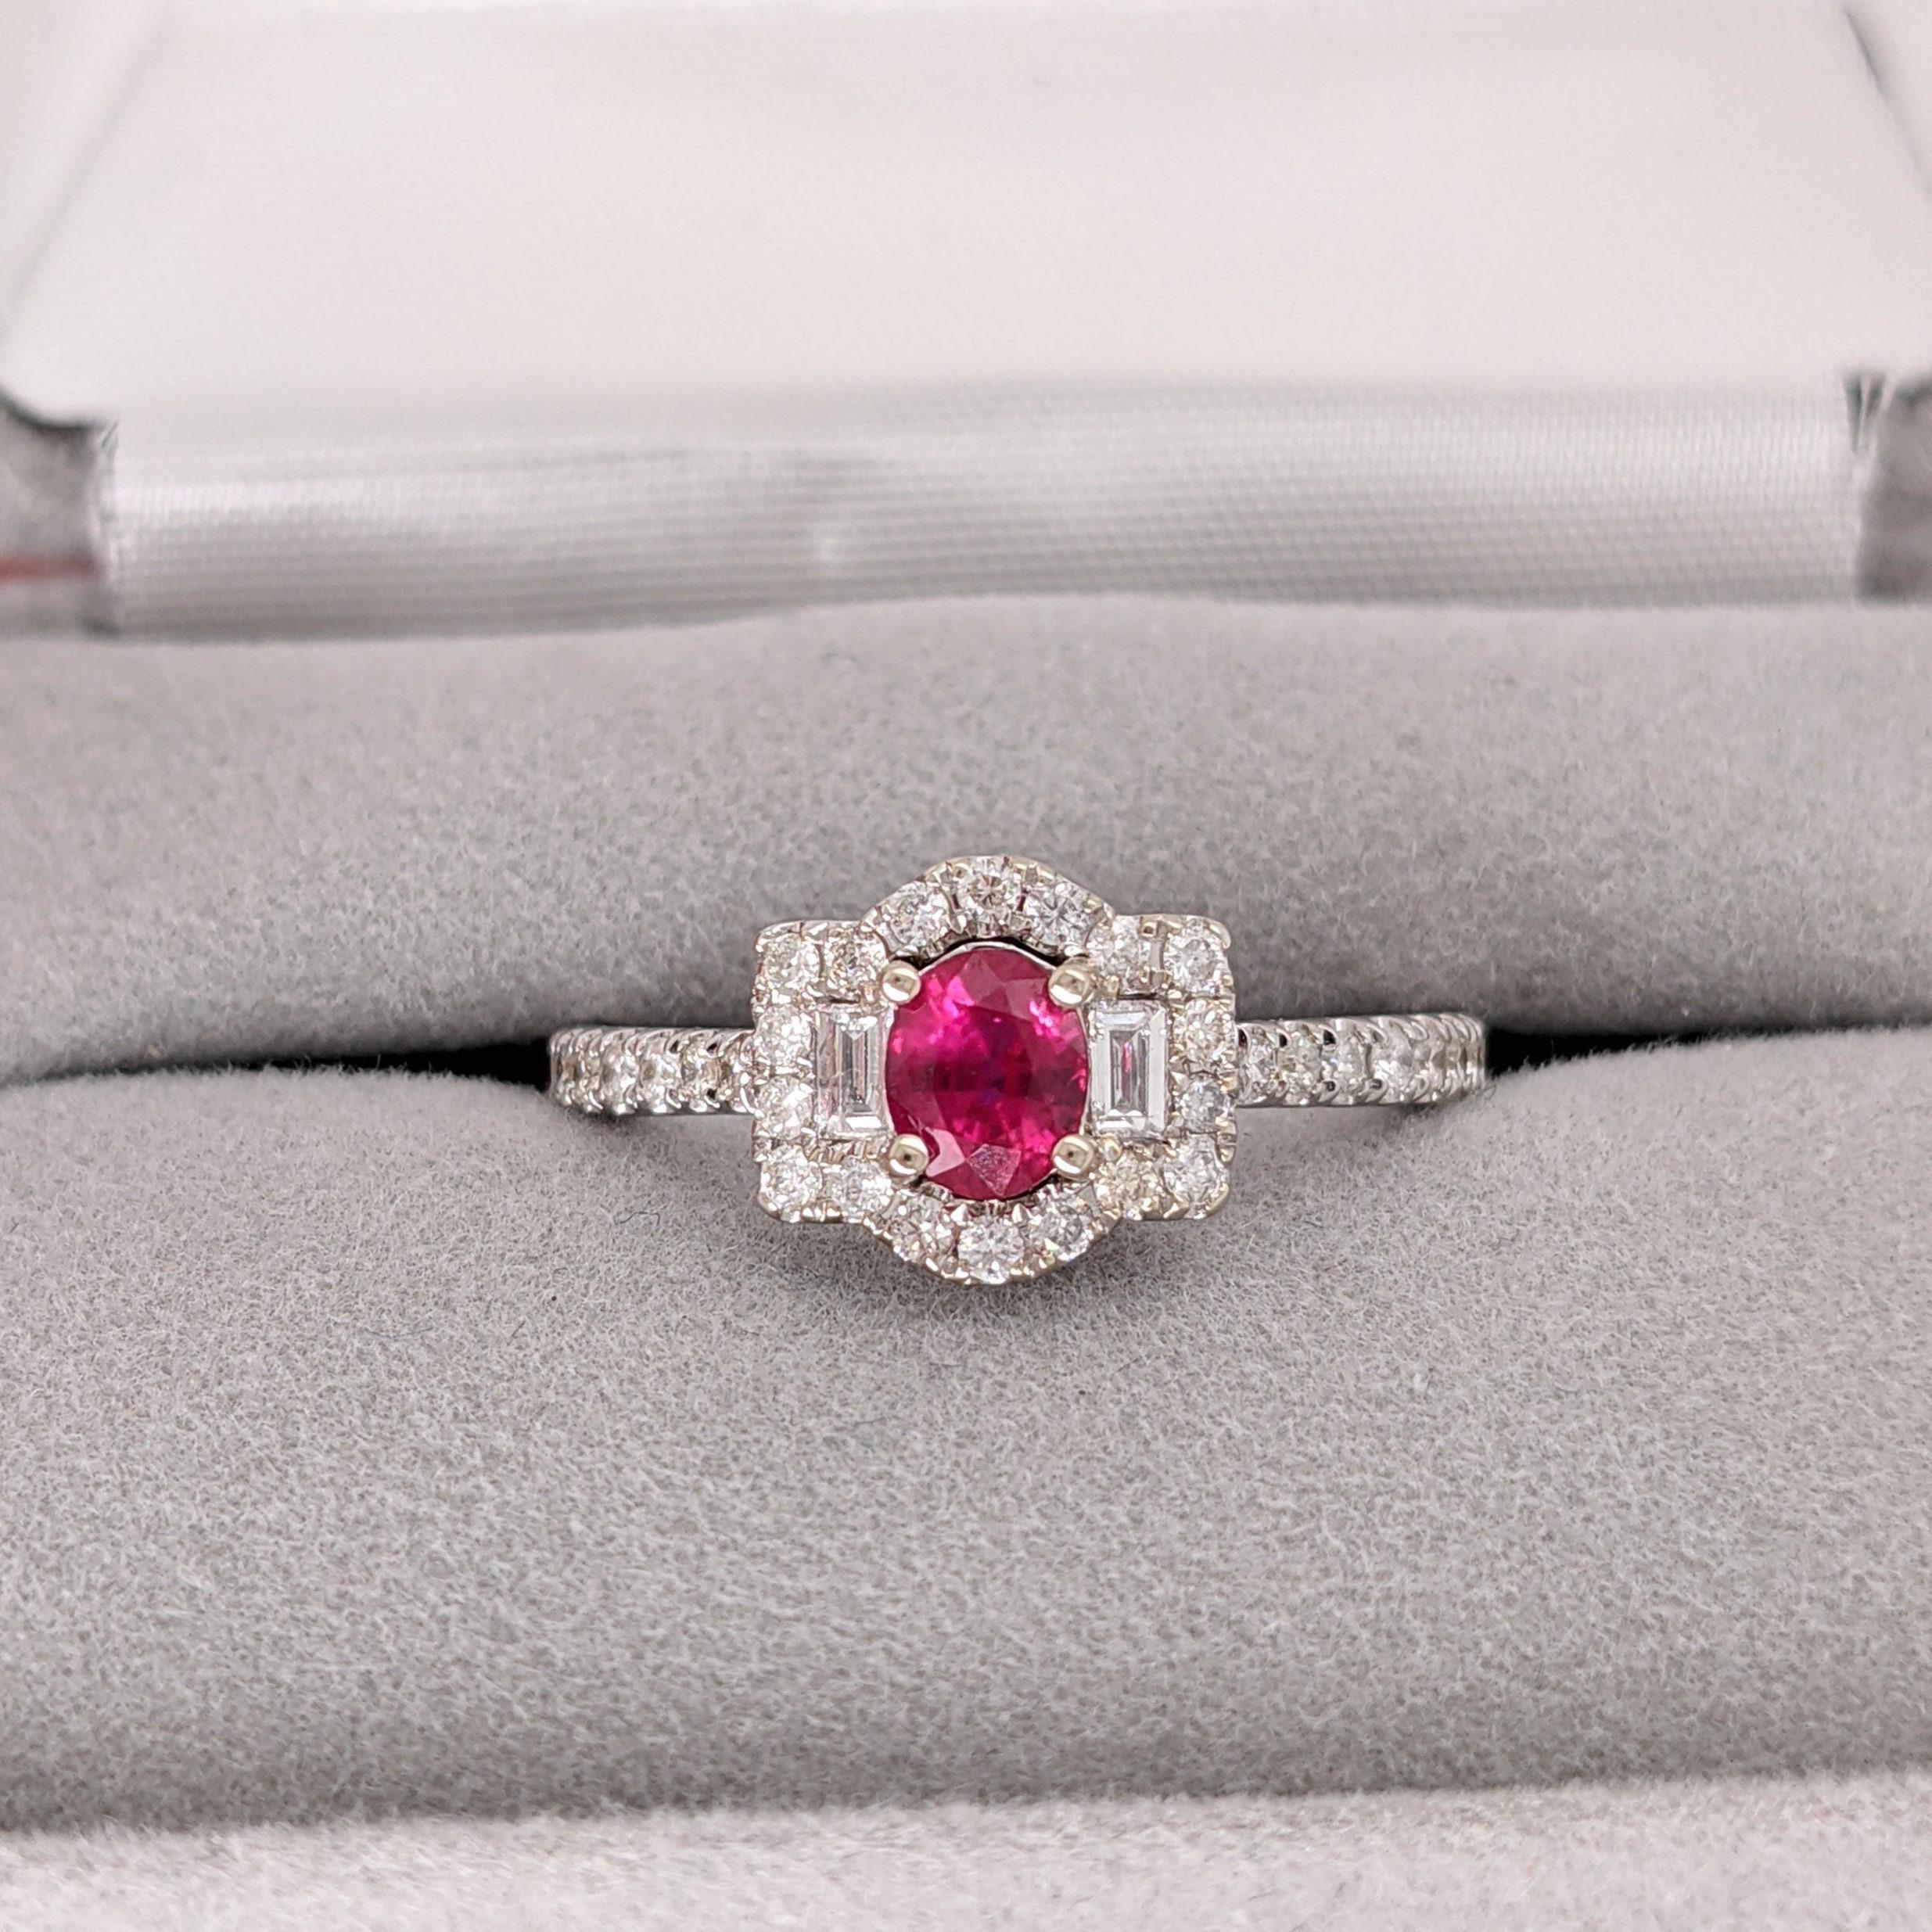 2.7ct Mozambique Ruby Ring w Earth Mined Diamonds in Solid 14k Gold Oval 5x4mm For Sale 1